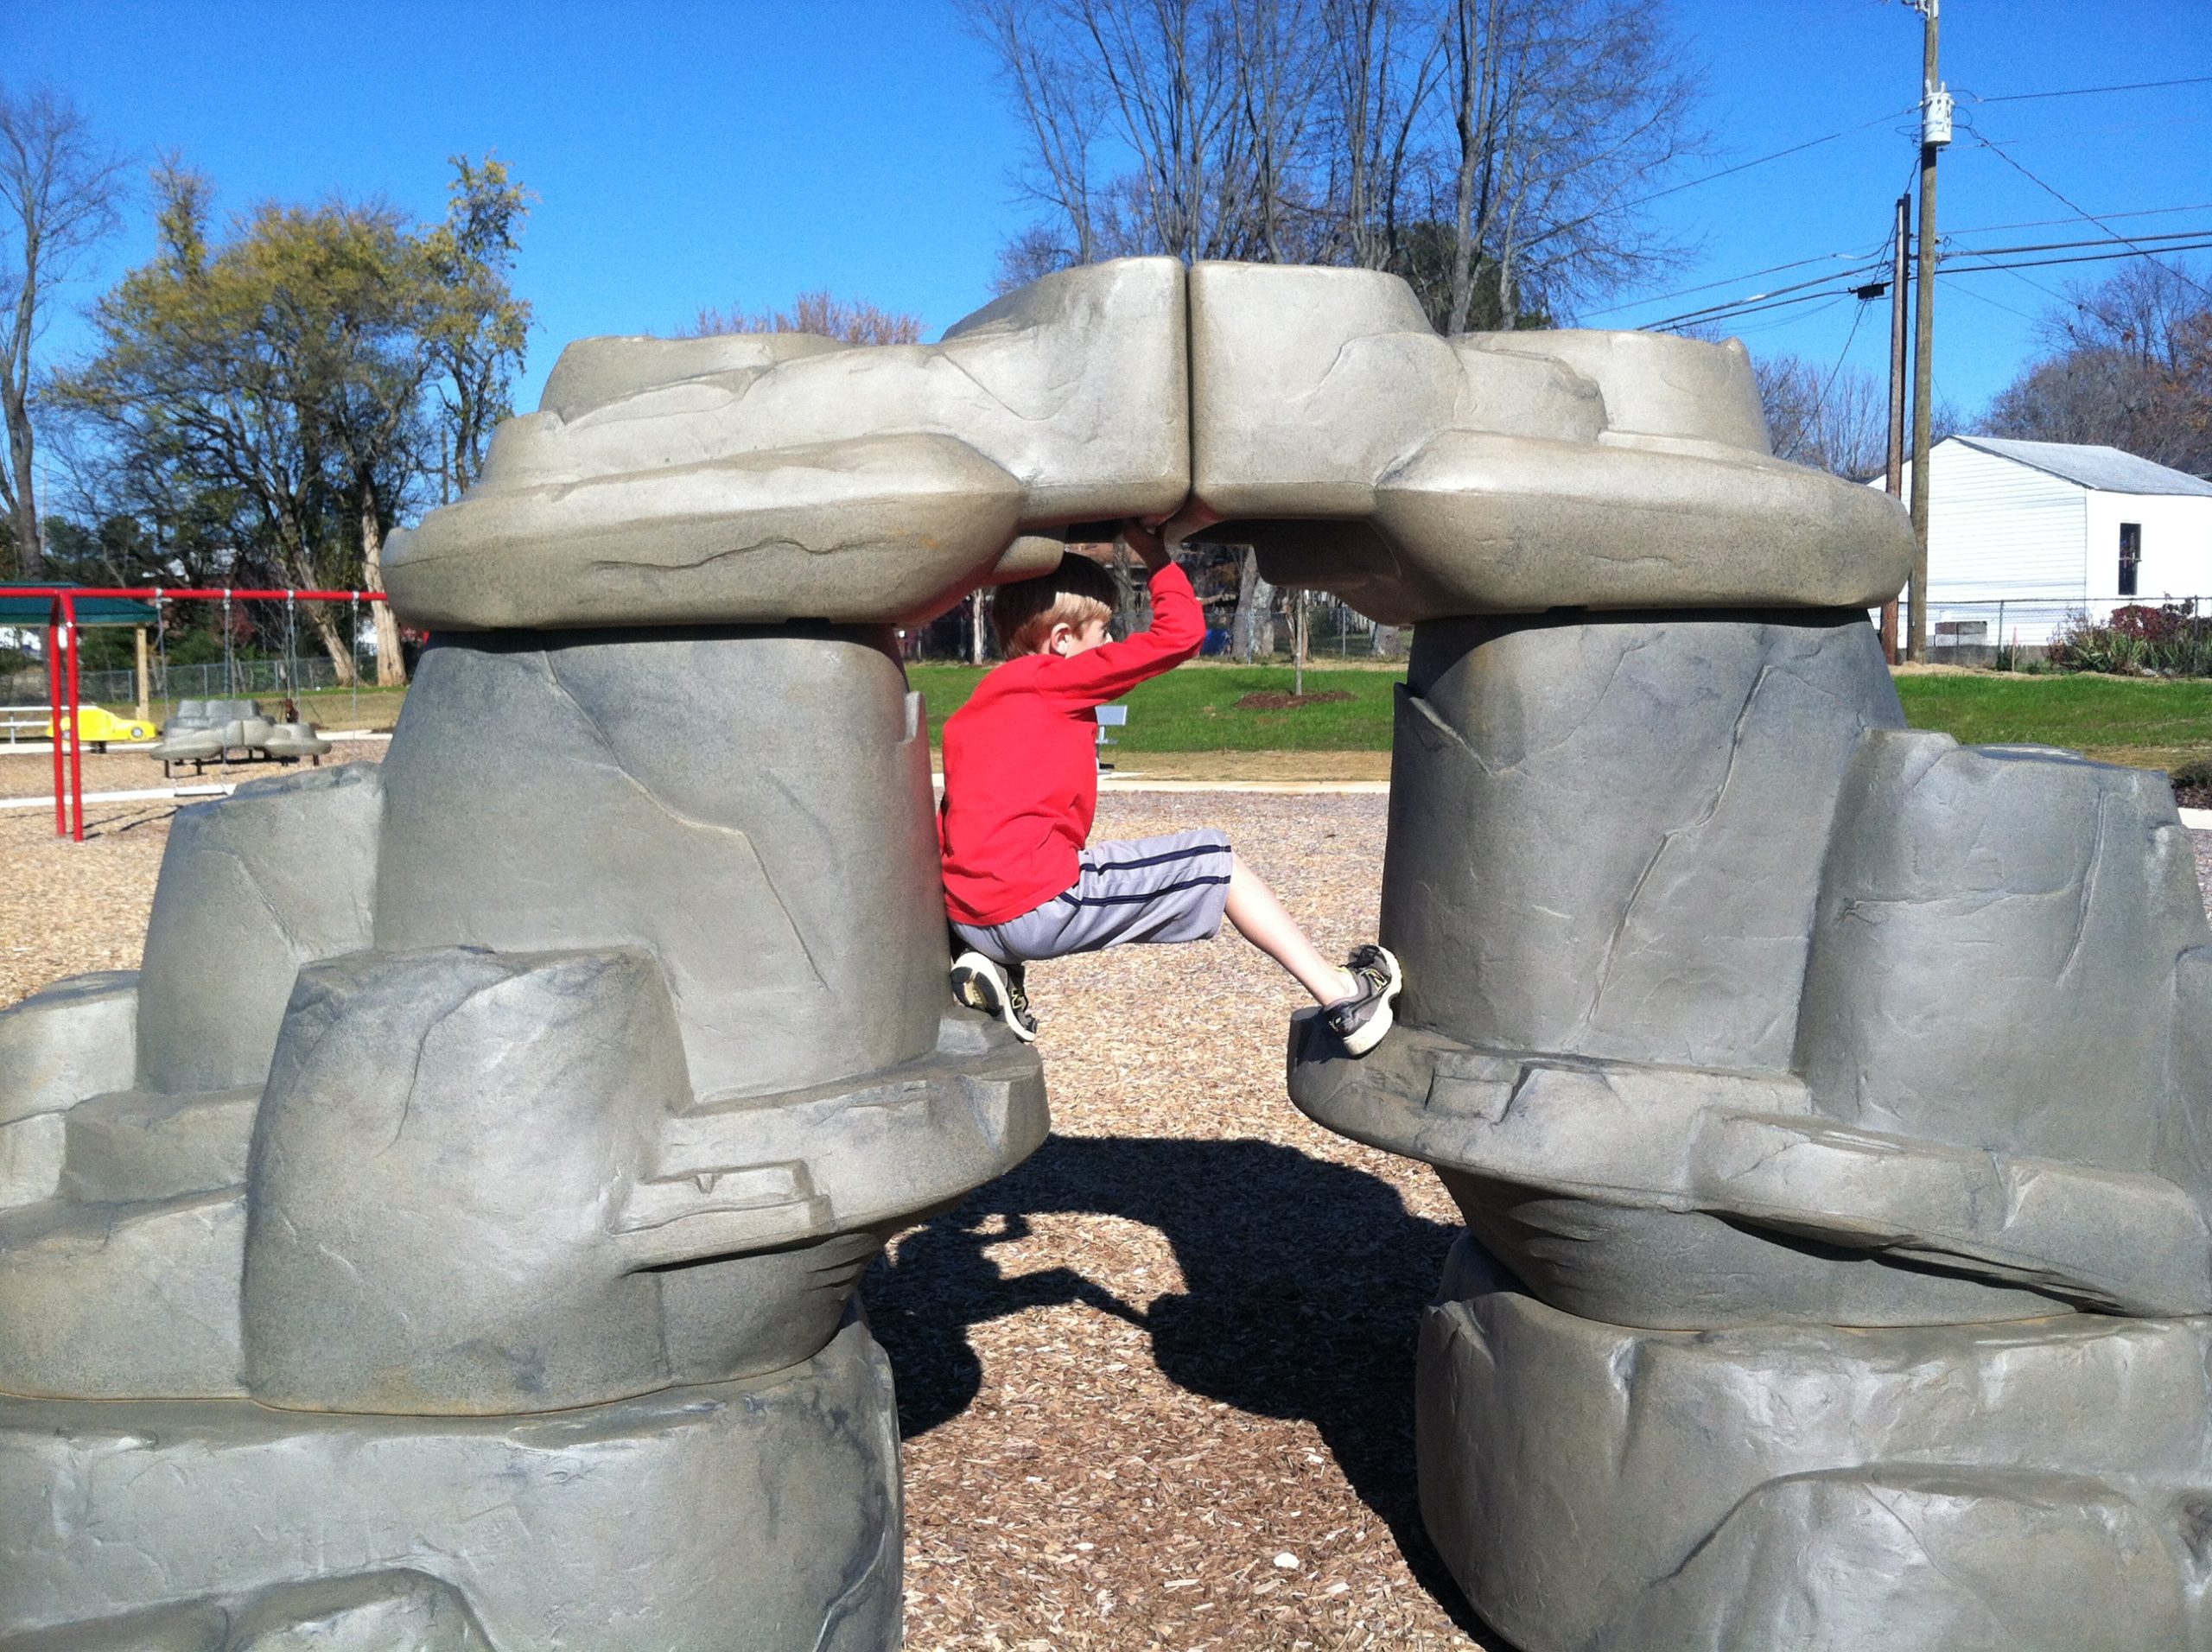 child playing on playground structure that looks like rocks